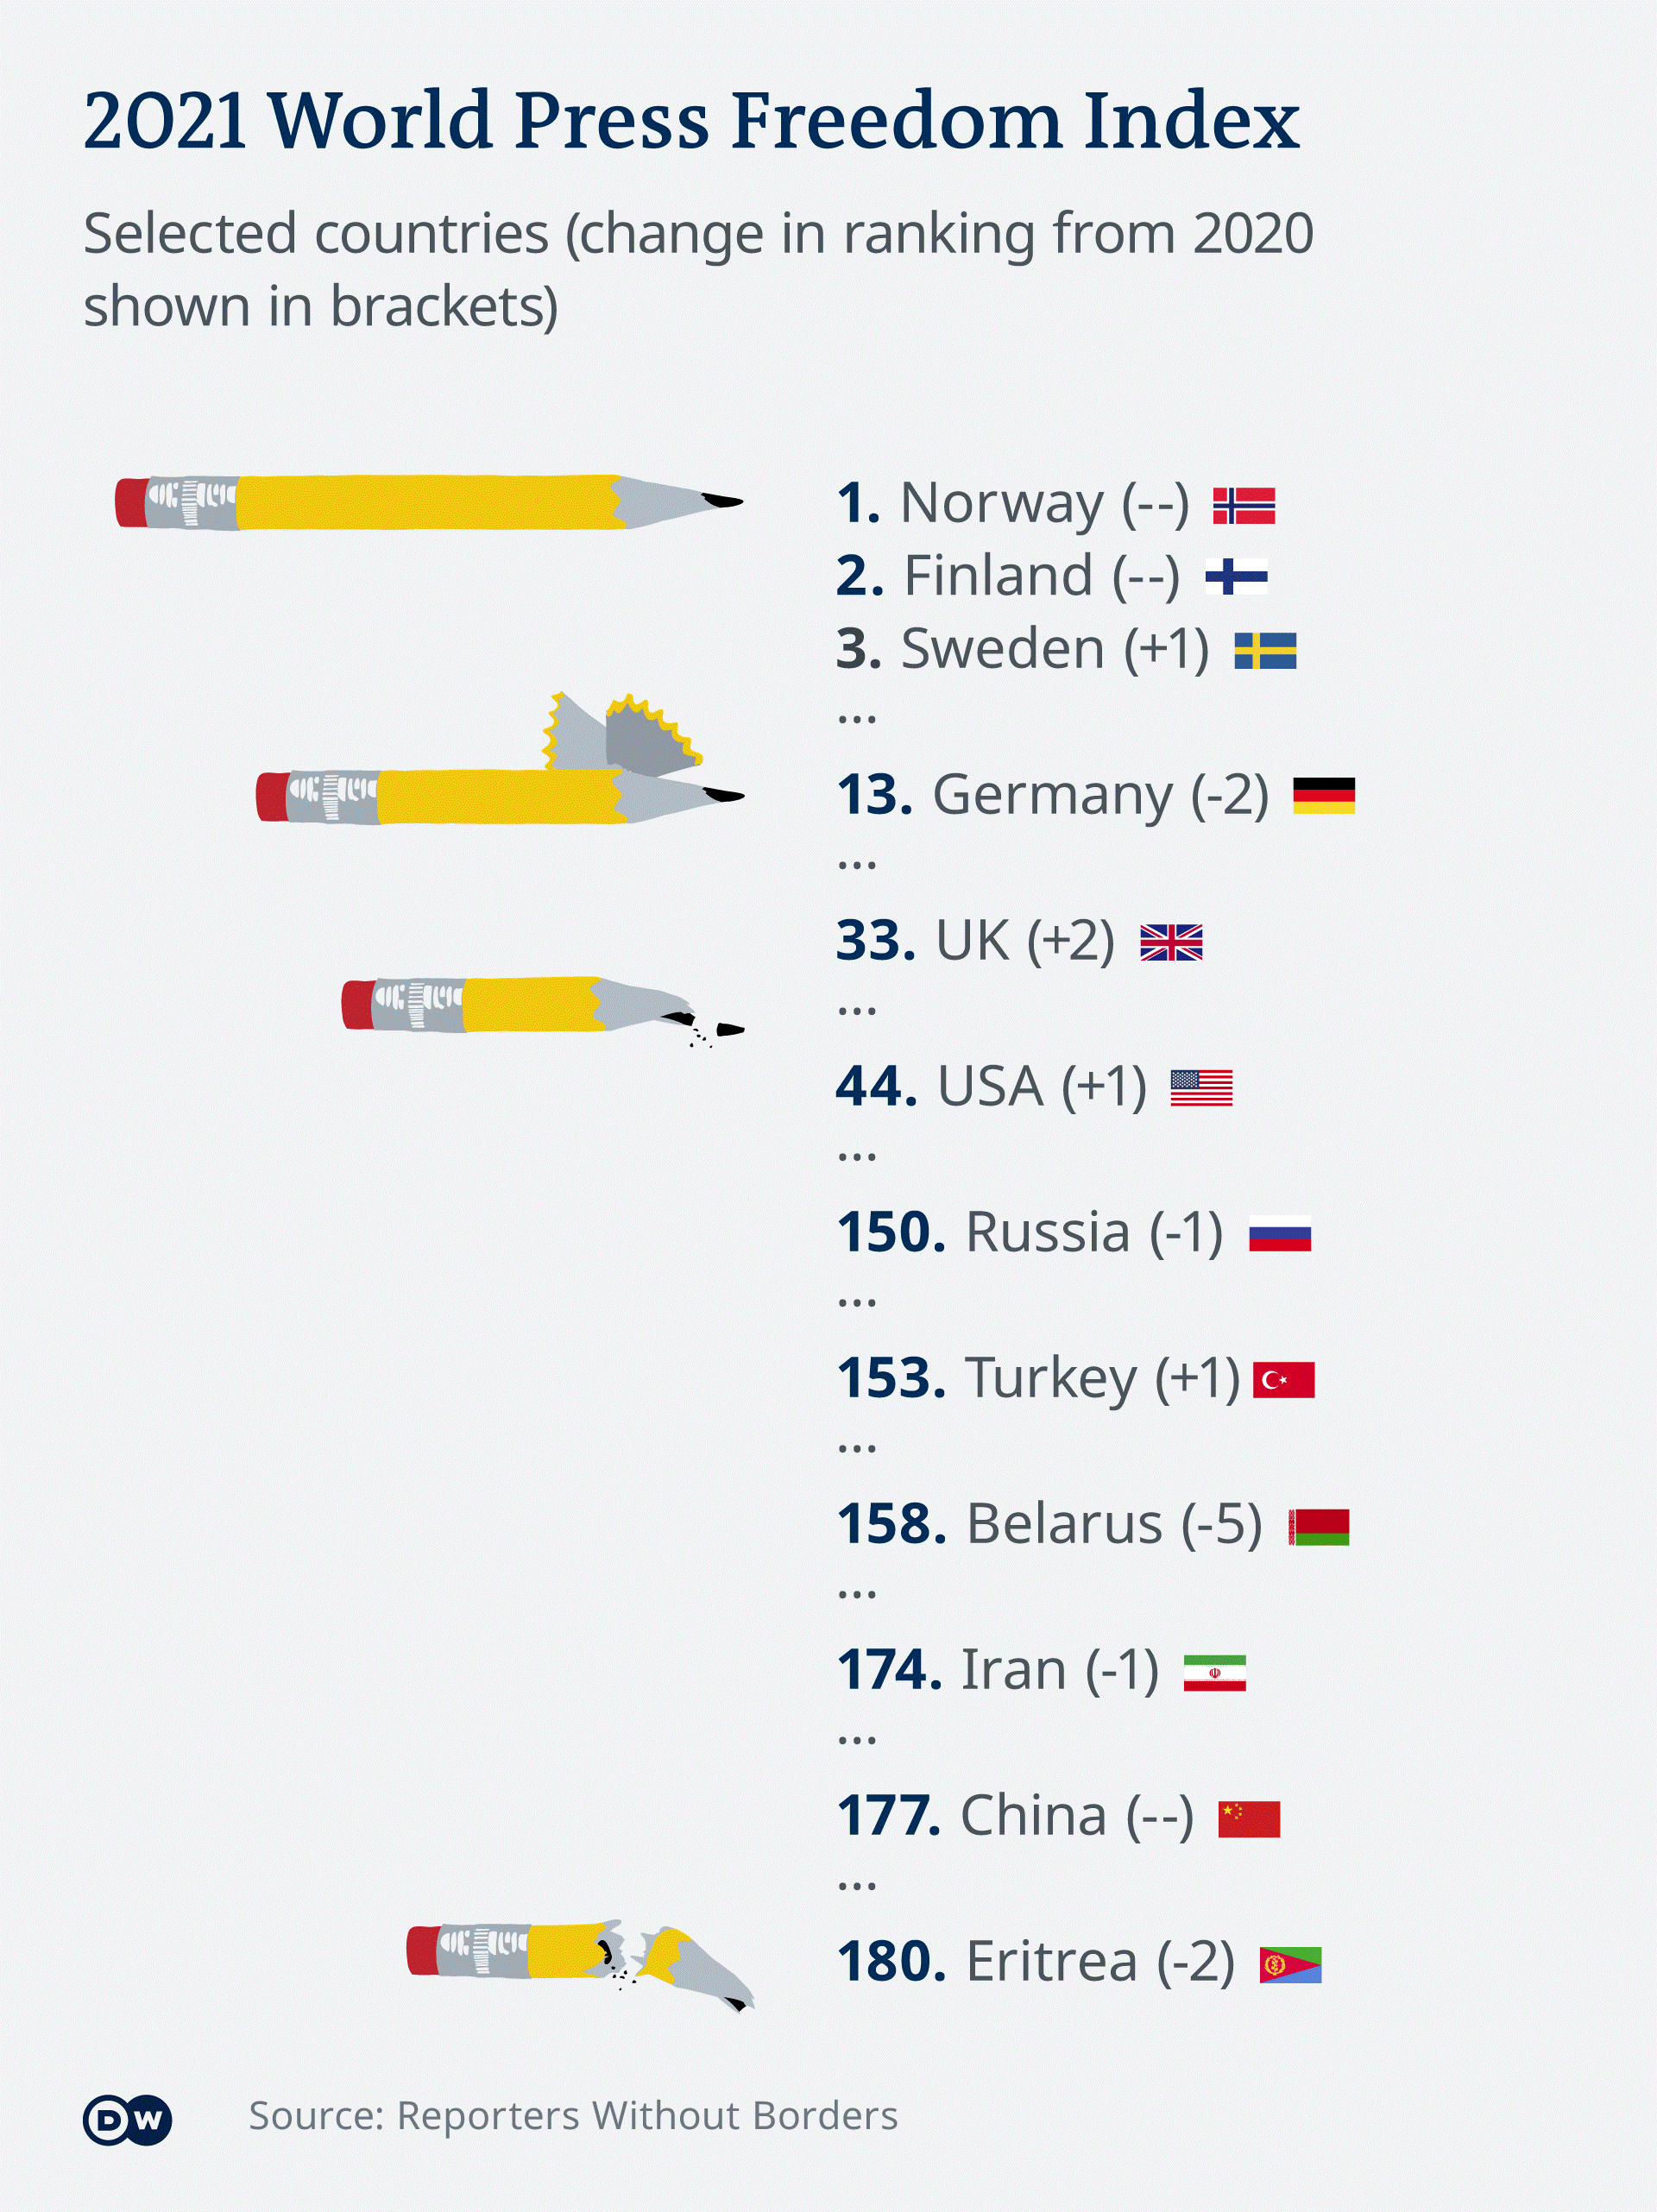 Infographic showing selected countries ranking in the RSF 2021 World Press Freedom Index (source: DW)